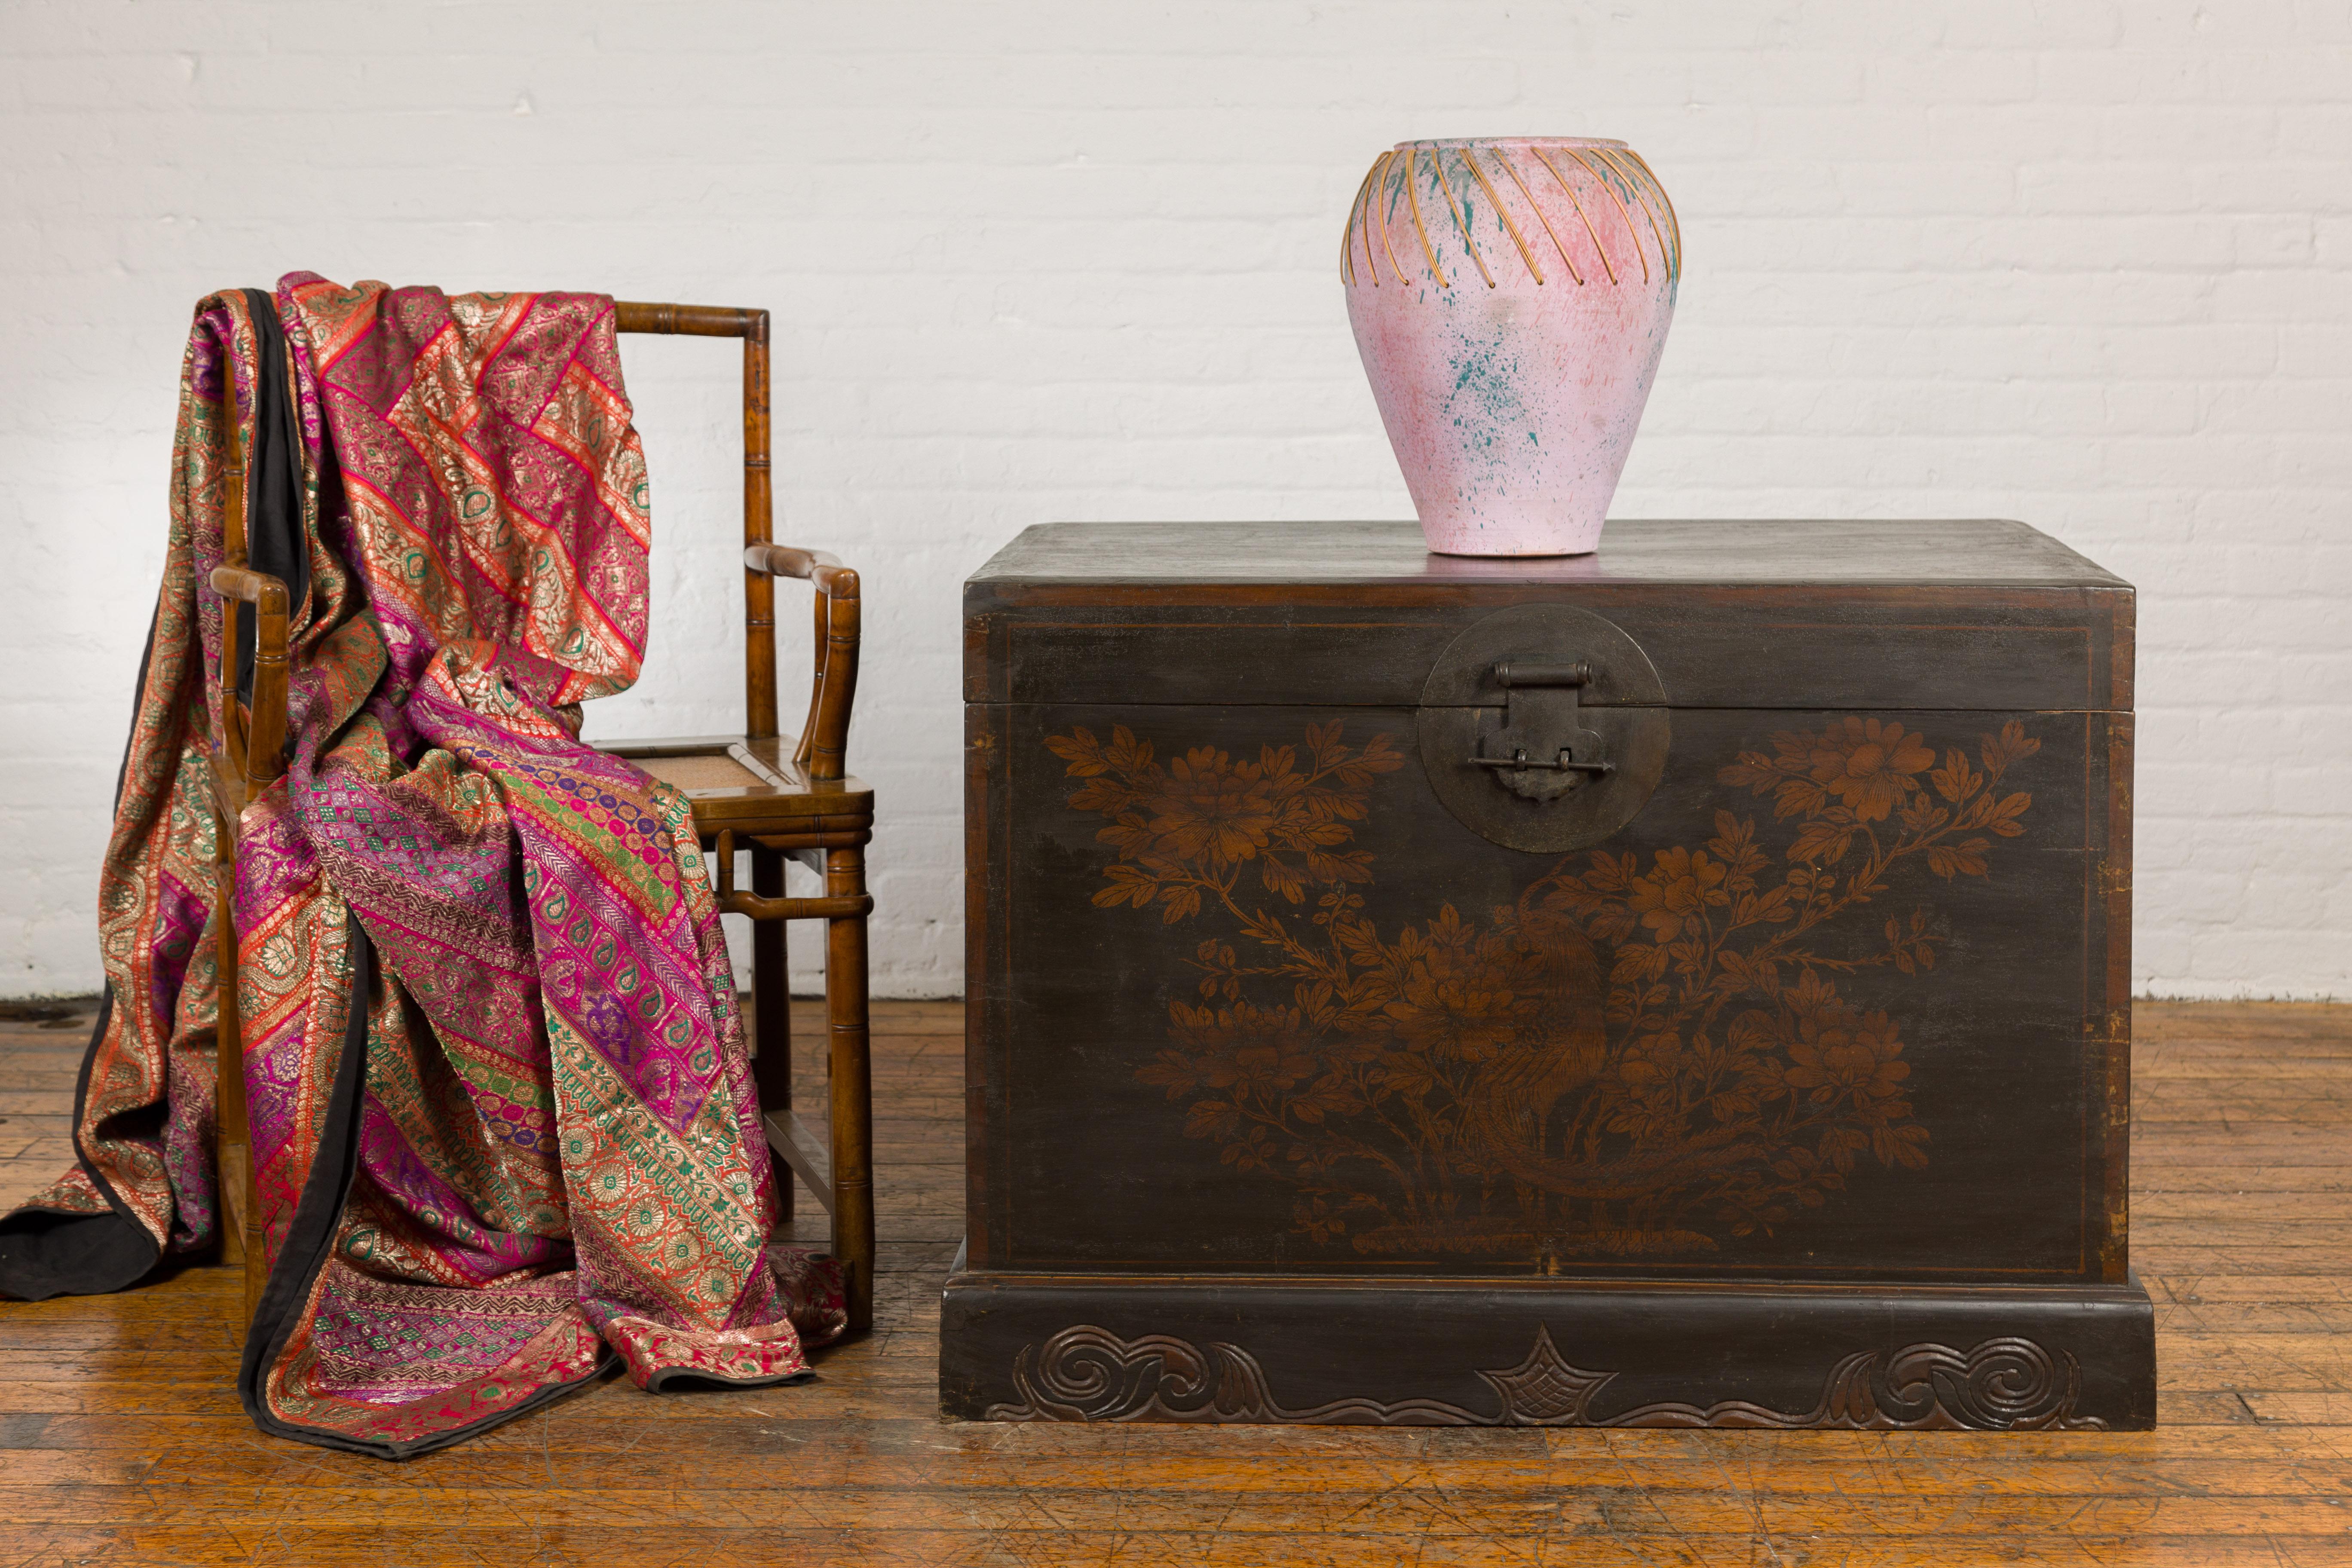 A Chinese Qing Dynasty period black and brown lacquer blanket chest from the 19th century with hand-painted bird and foliage motifs and nicely carved base. Unearth the beauty of Asian craftsmanship with this 19th-century Chinese Qing Dynasty blanket